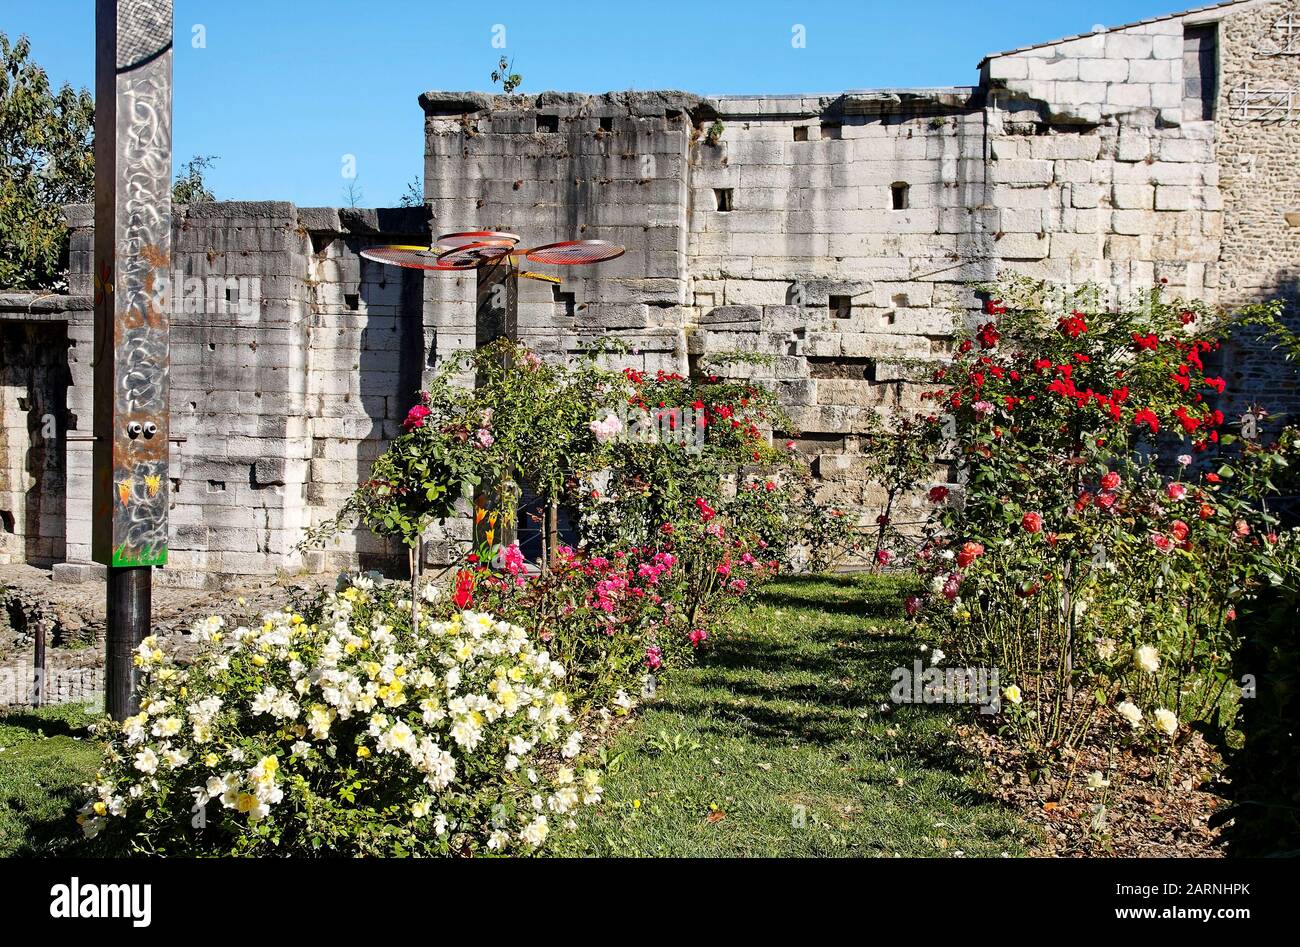 Cybele Archeological Garden, flowers, old Roman ruins, stone, ancient remains, contrasting textures, Vienne, France, summer, horizontal Stock Photo